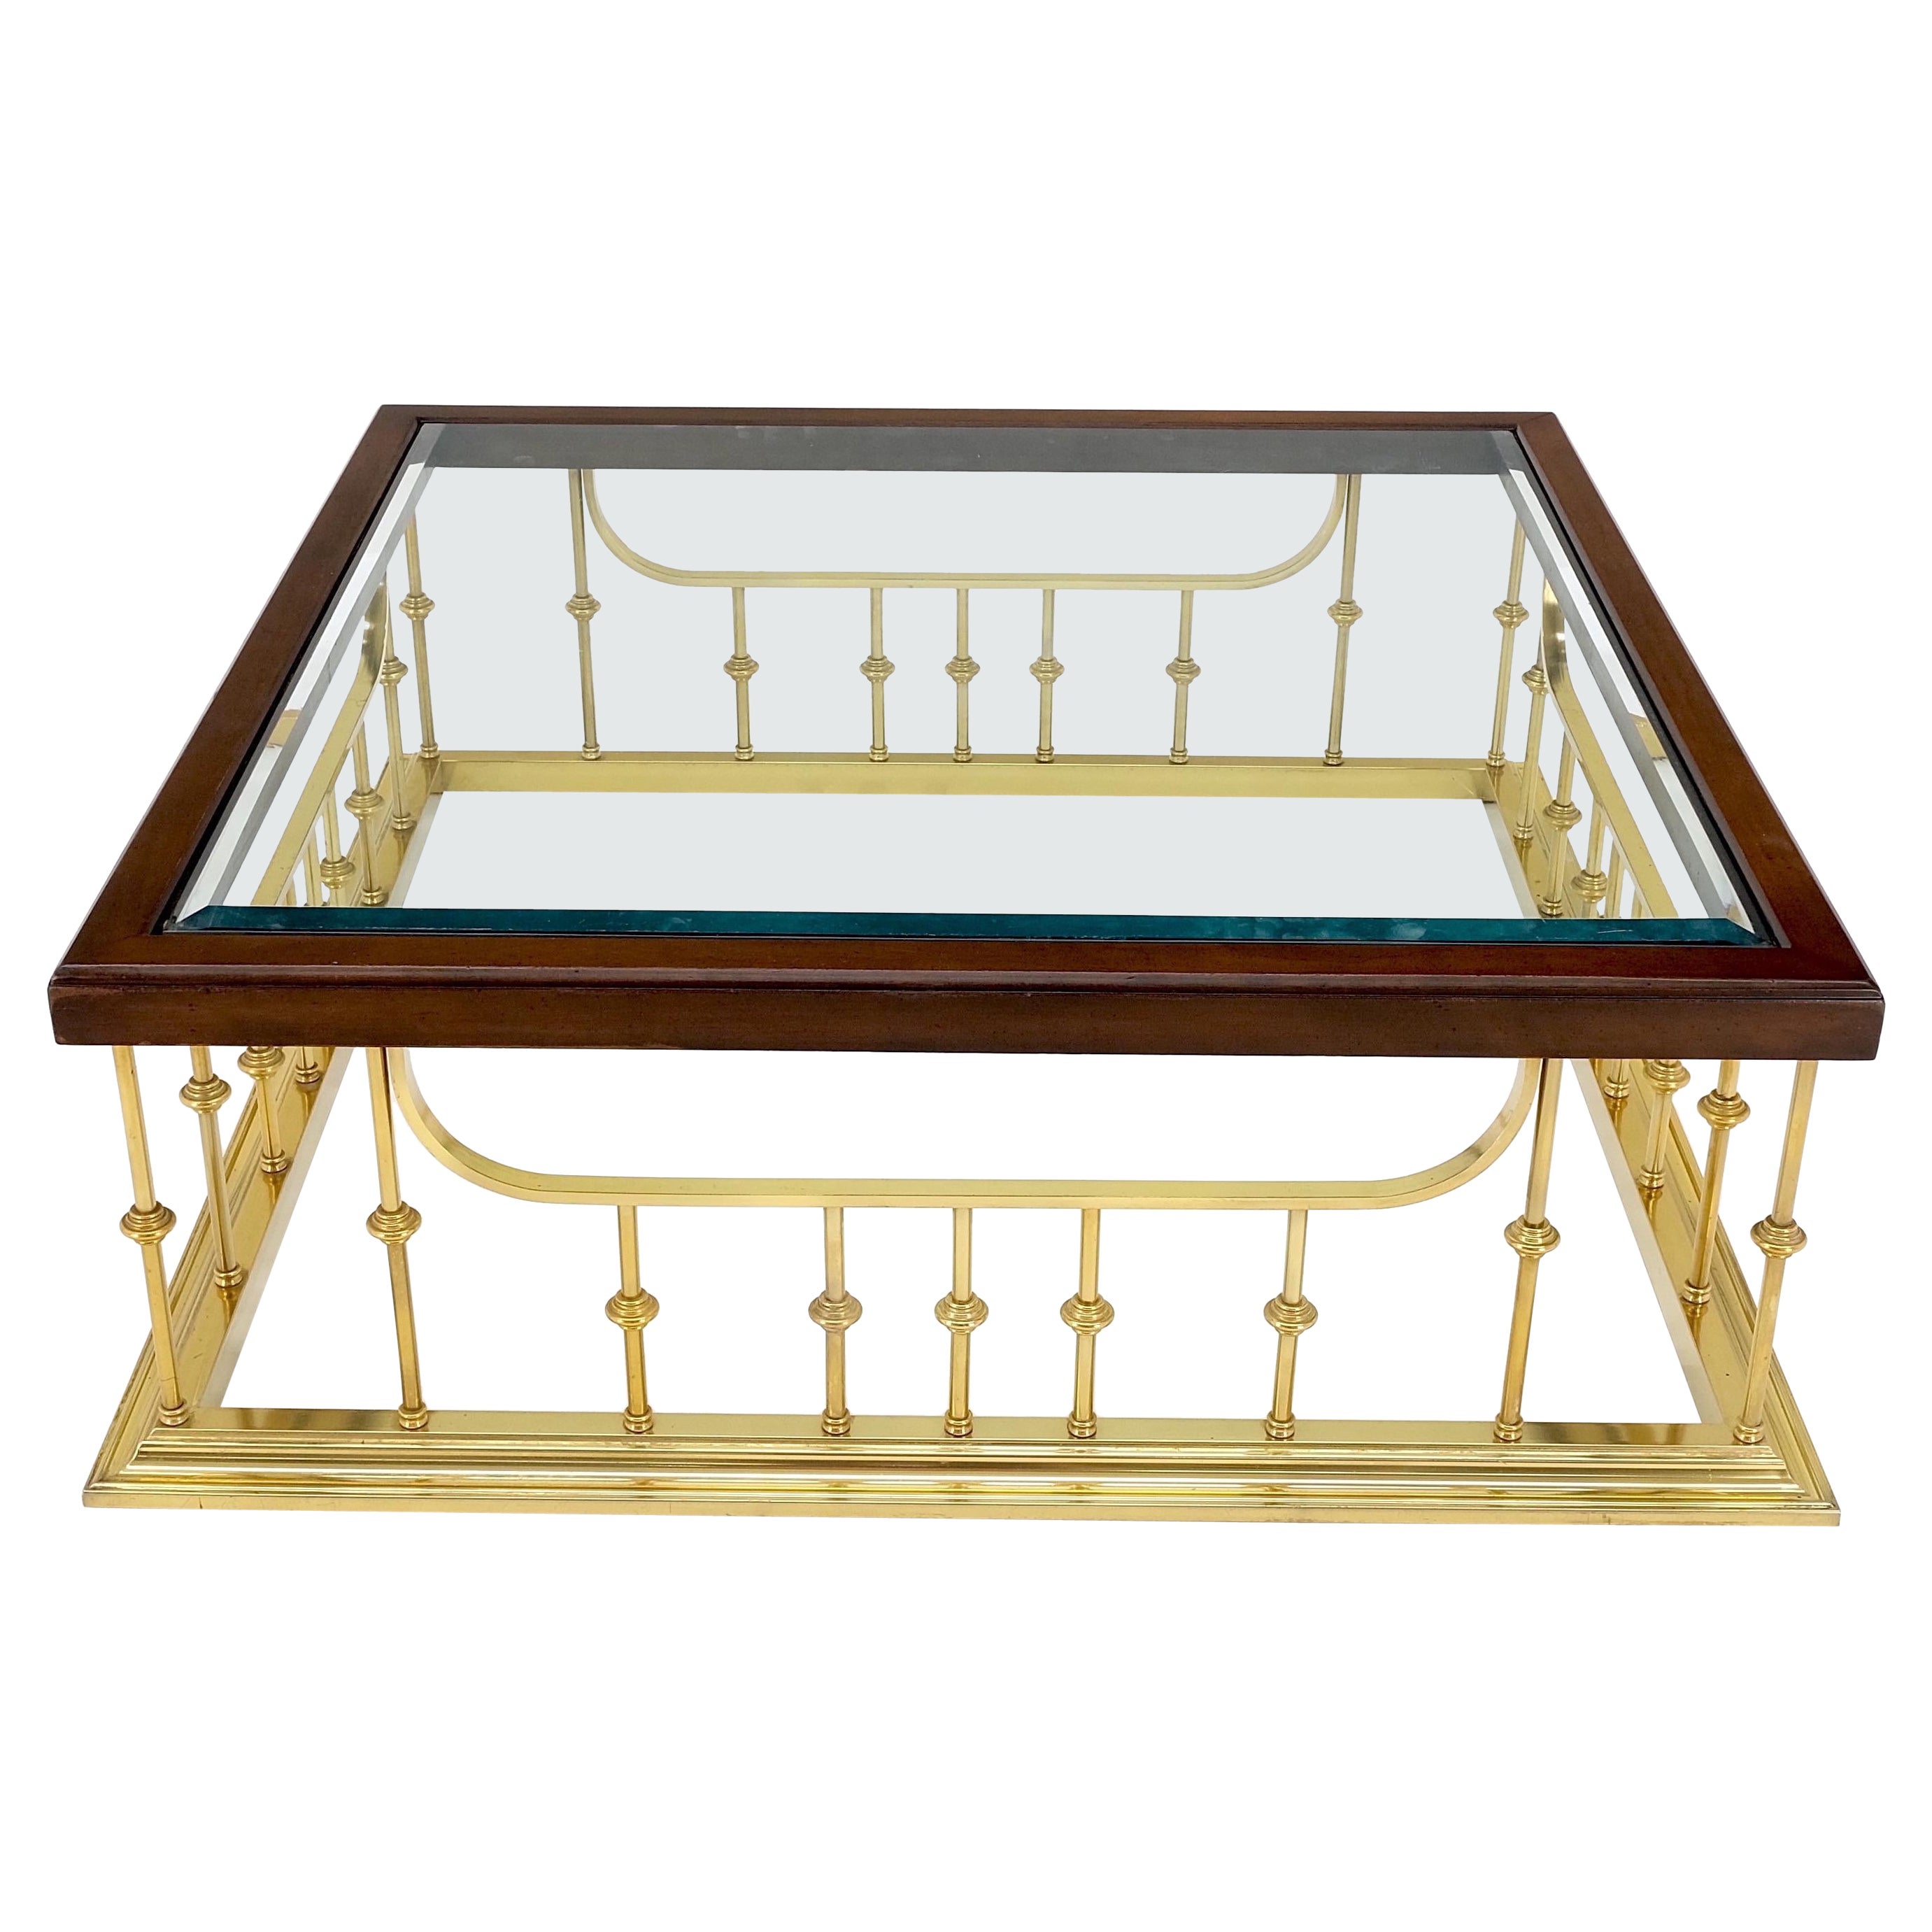 Fireplace Area Style Metal Base Midcentury Square Glass Top Coffee Table Mint! For Sale